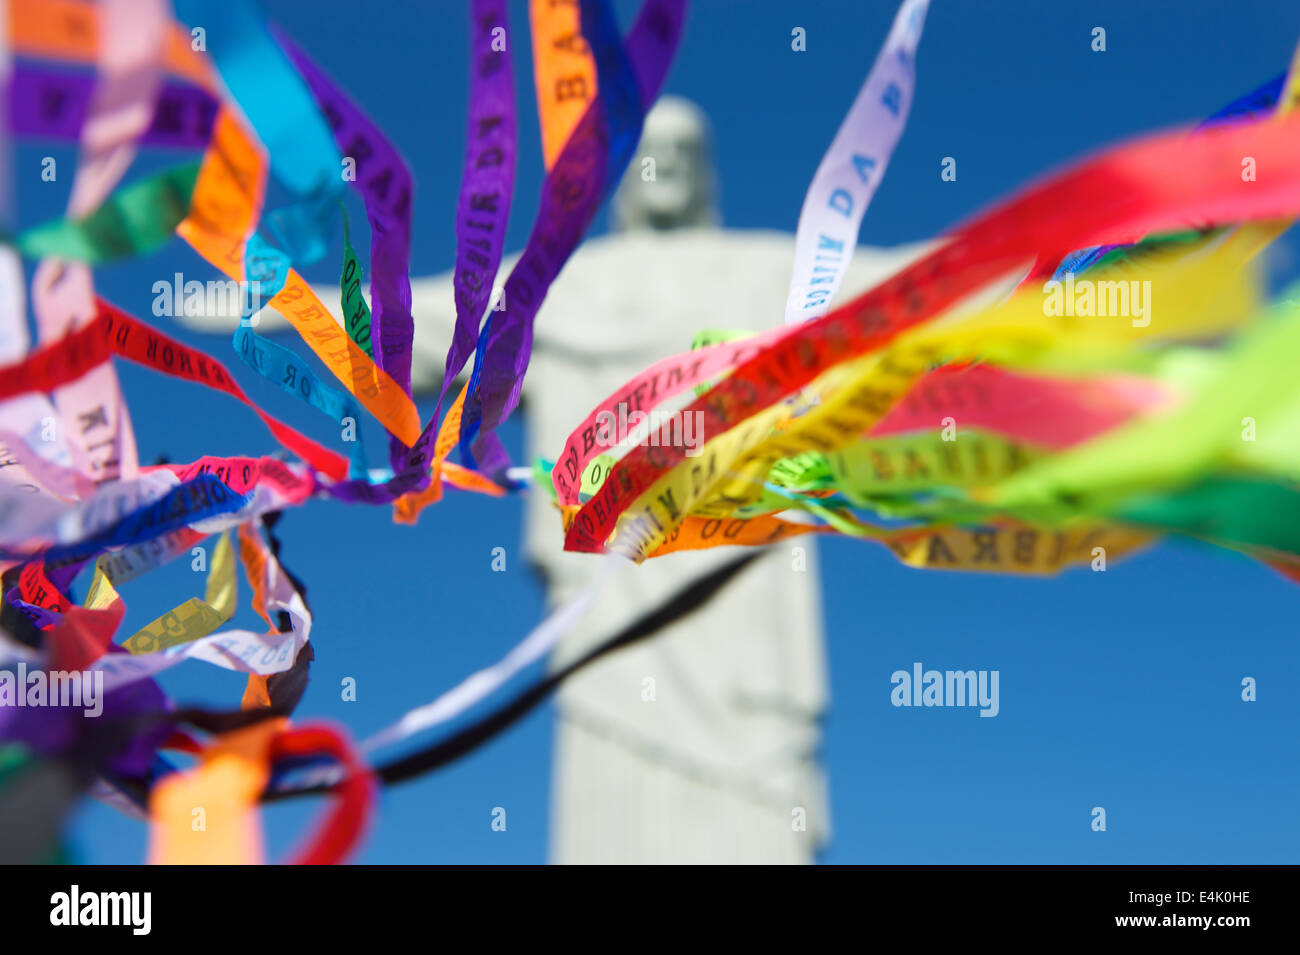 Bright and colorful Brazilian wish ribbons flying in blue sky Corcovado Christ the Redeemer statue Rio de Janeiro Stock Photo